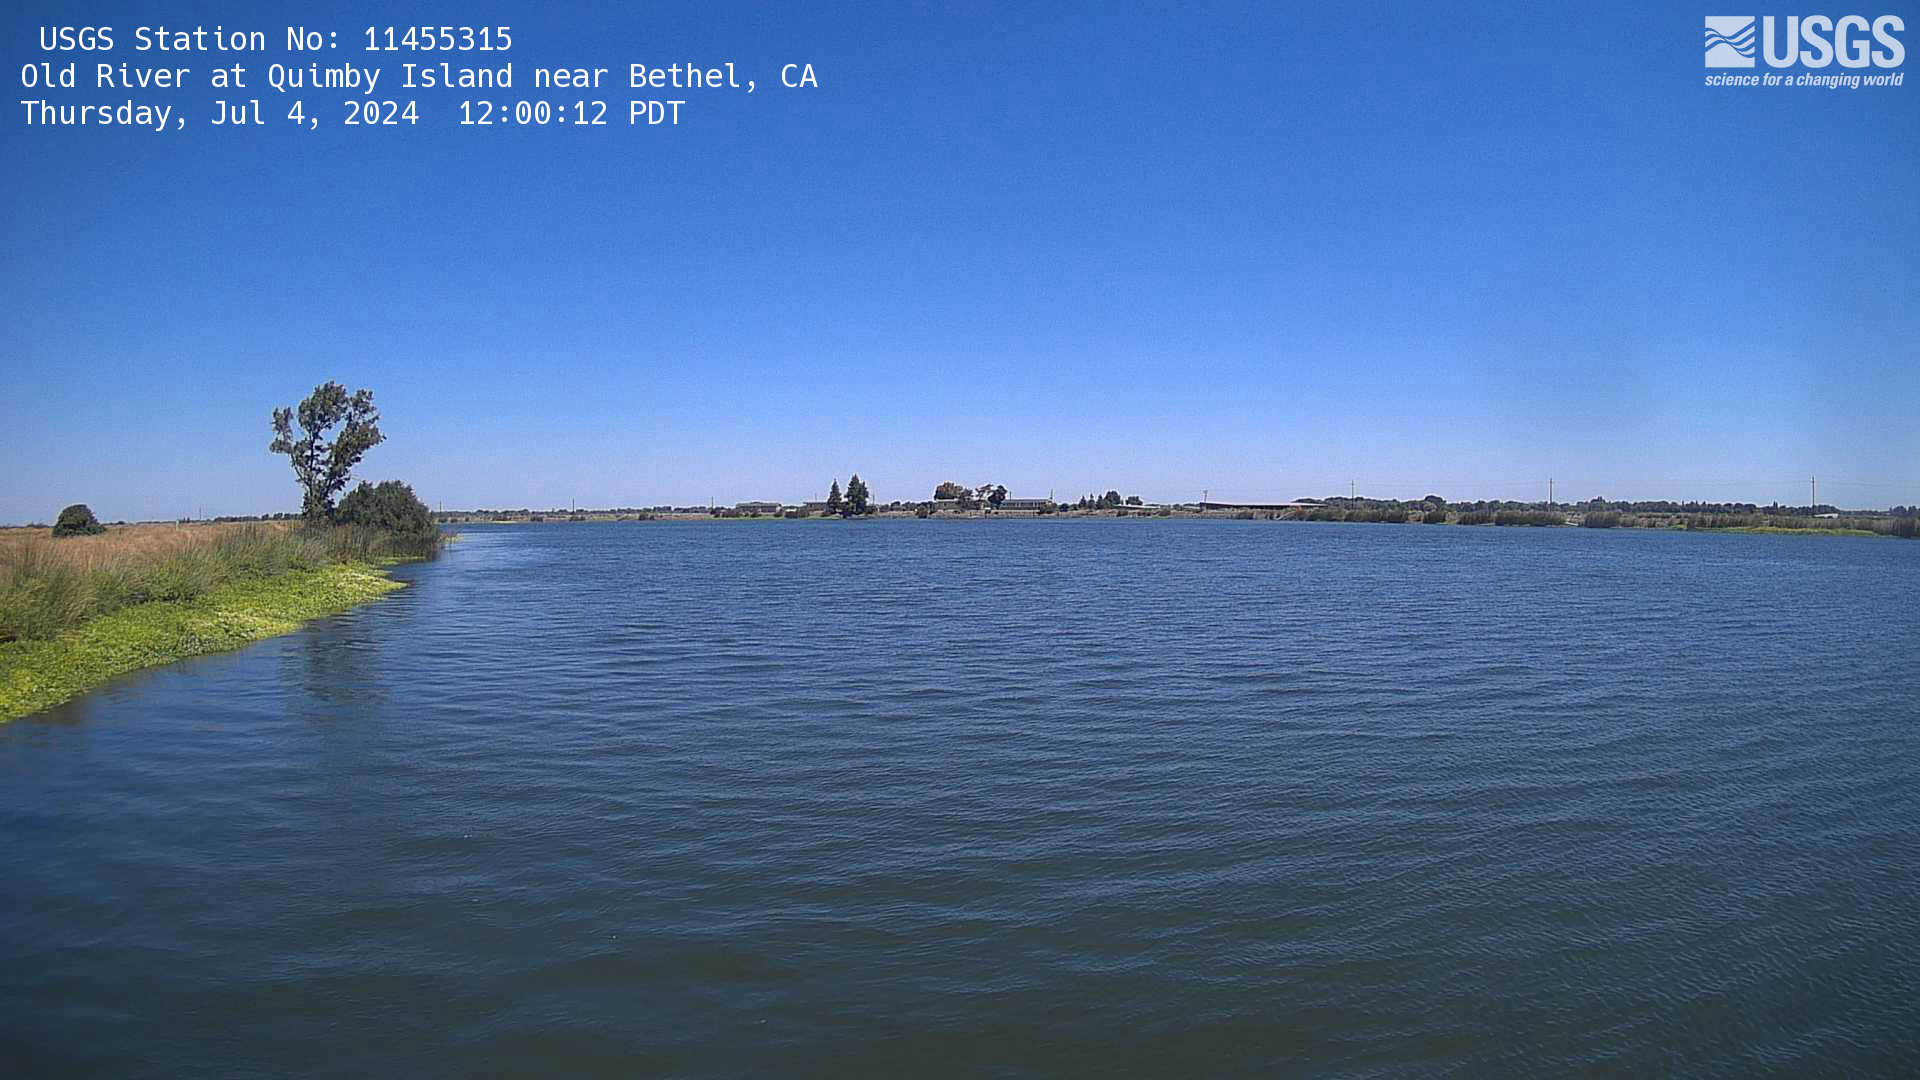 This is the most recent camera image of Old River at Quimby Island near Bethel webcam.